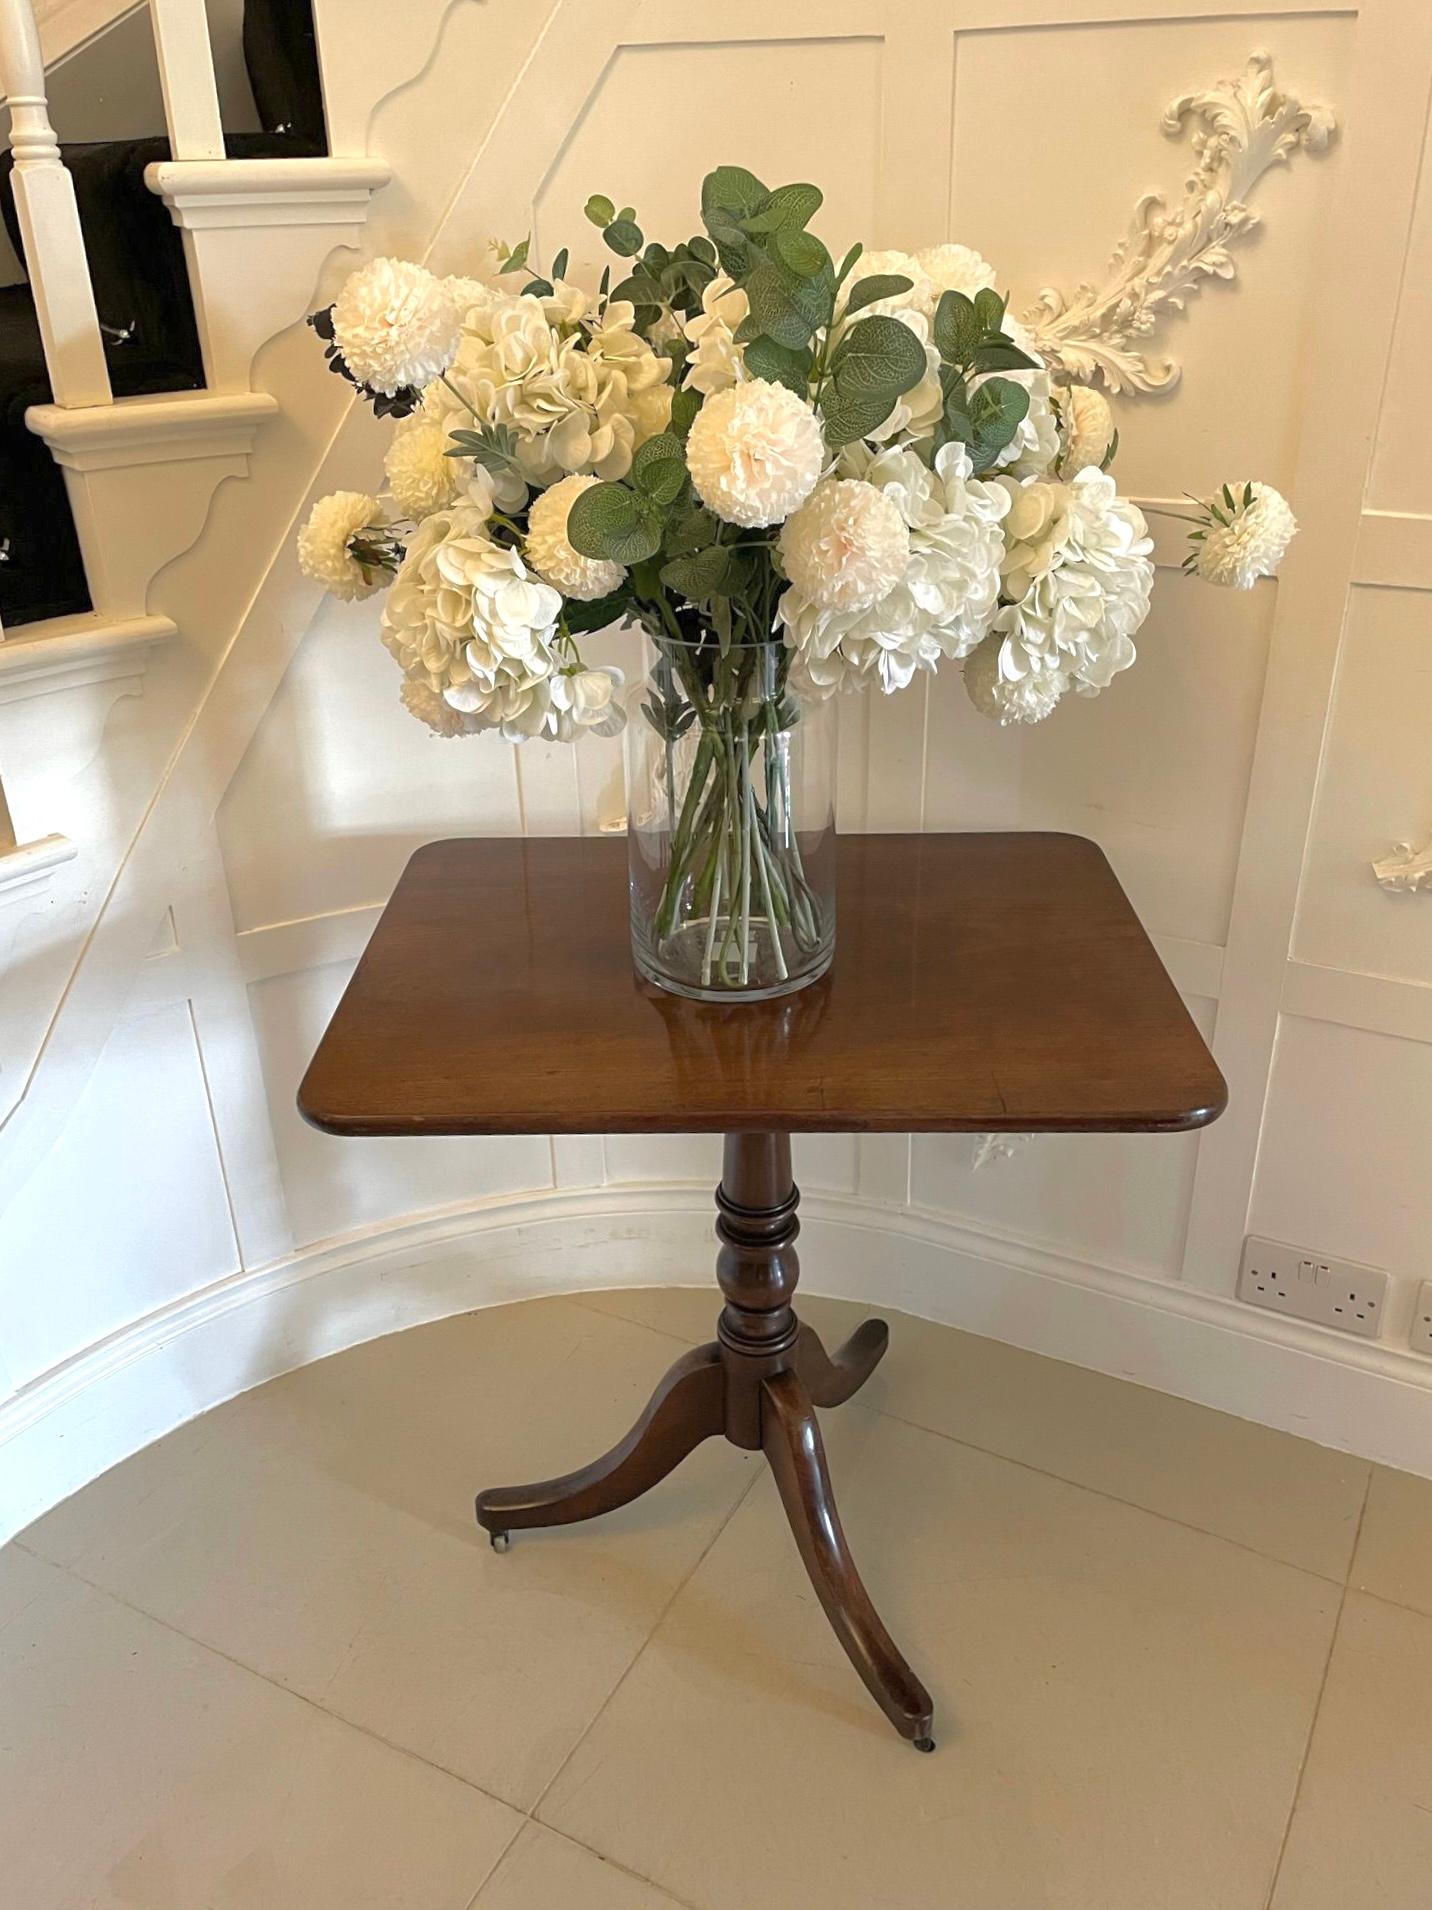 Antique George III mahogany table having a lovely rectangular mahogany top supported by an elegant shaped turned column standing on three mahogany shaped sabre legs.

A lovely example in its original condition having a desirable colour and